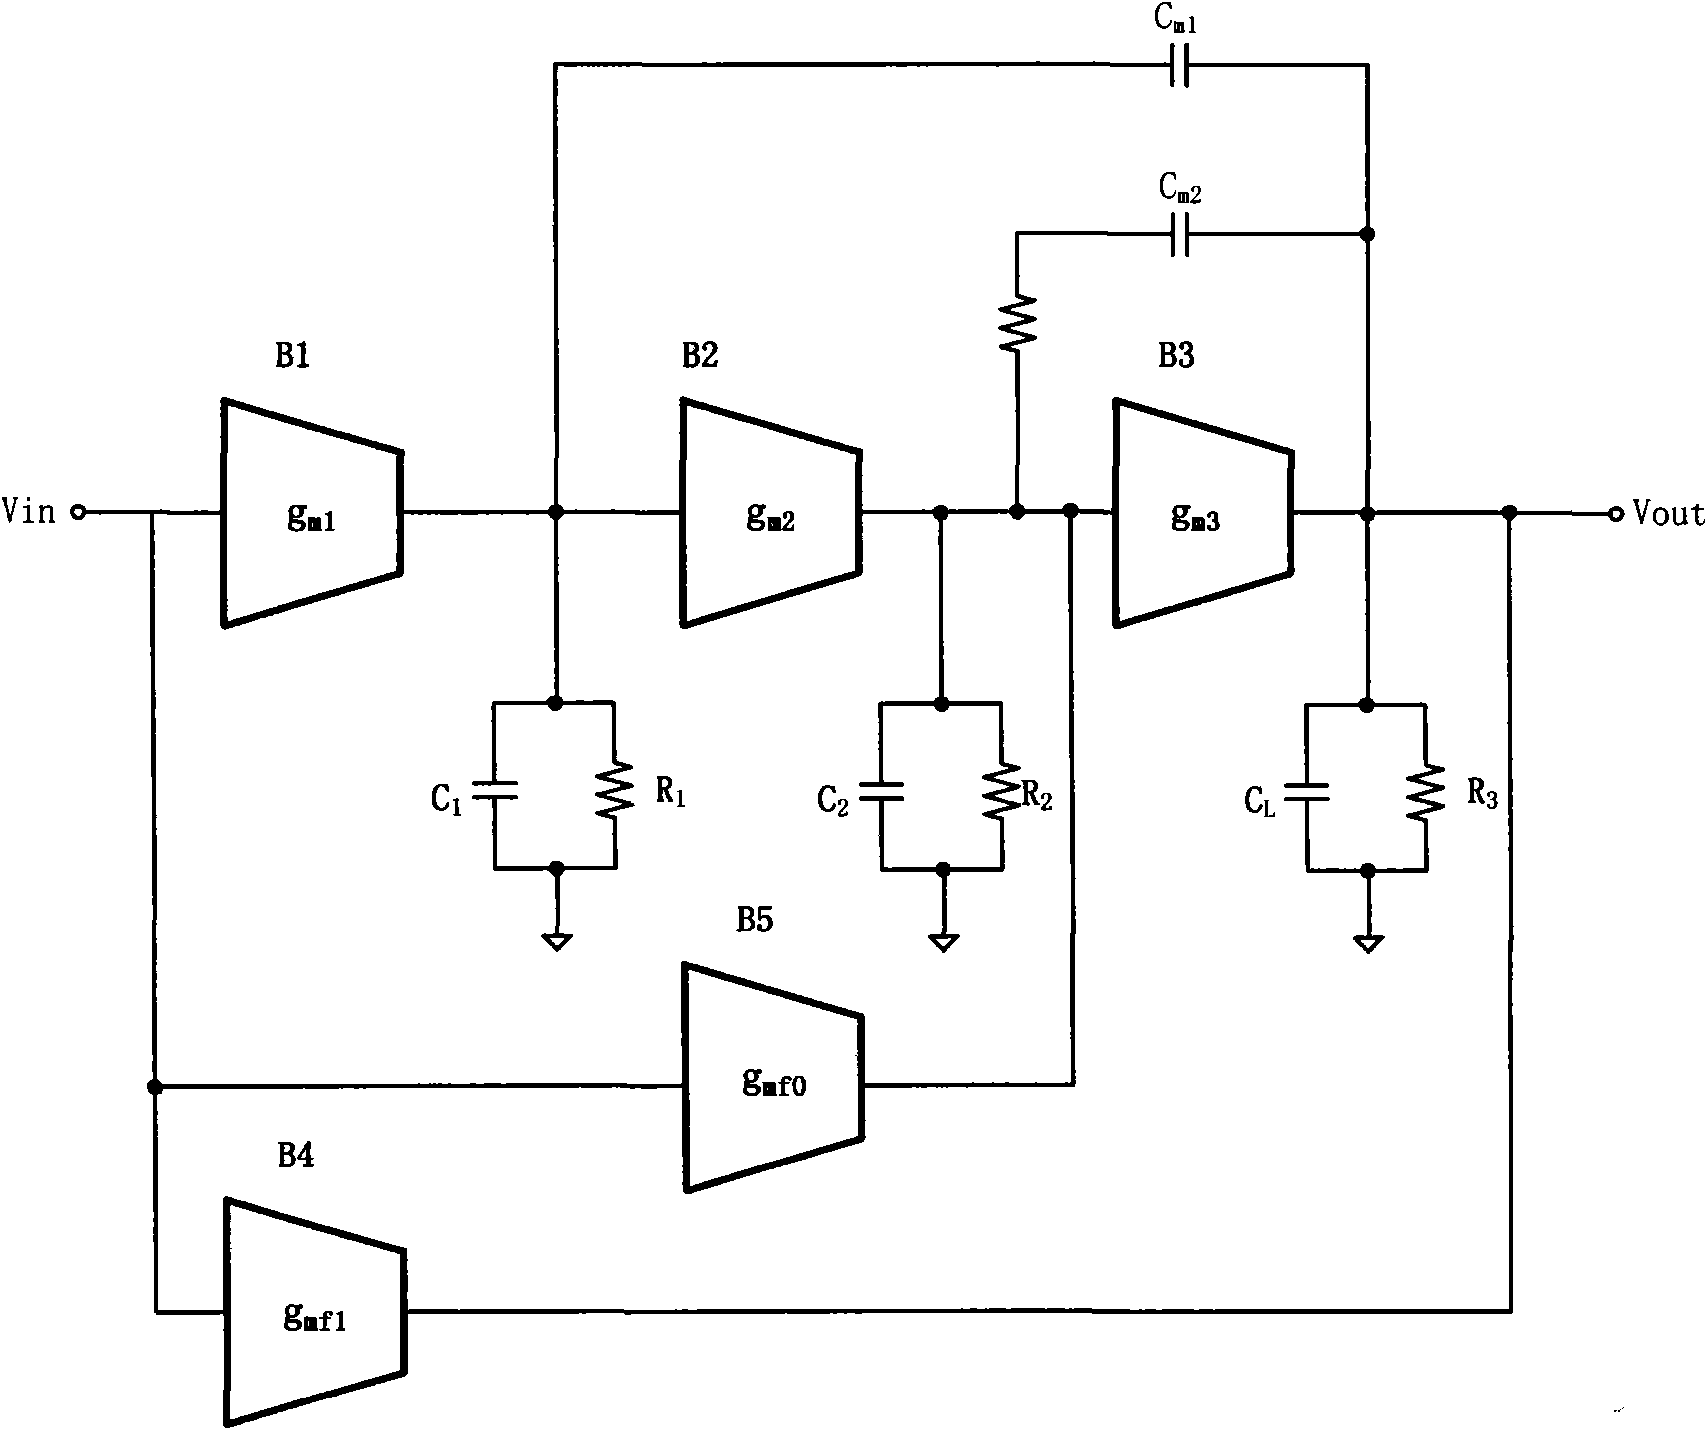 High-bandwidth low-power consumption frequency-compensation three-stage operational amplifier